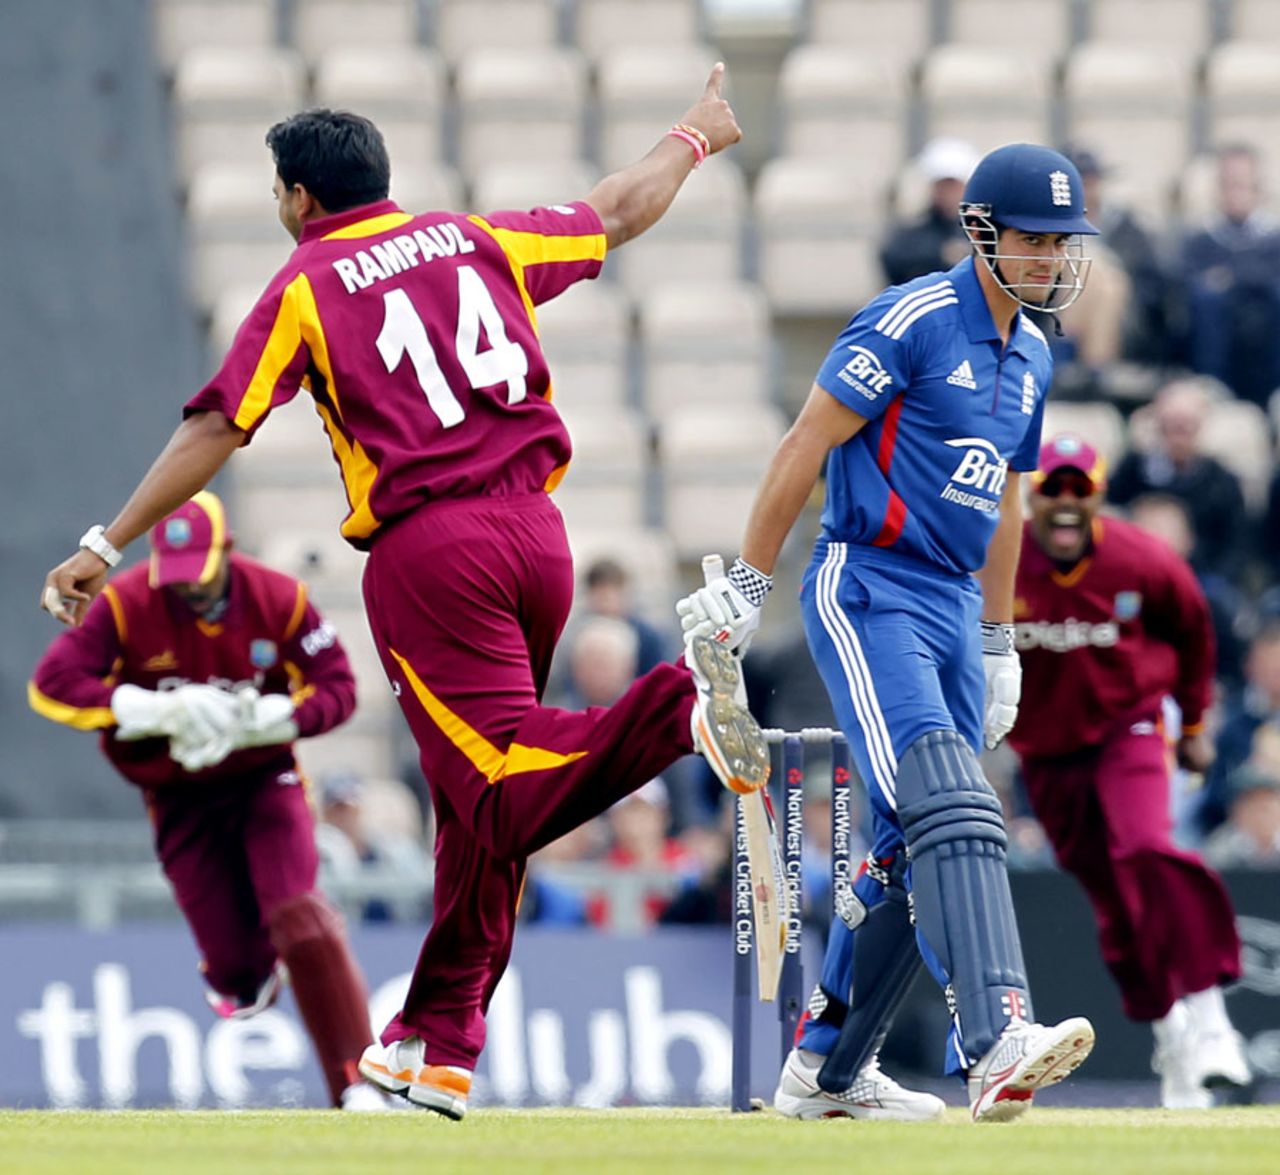 Alastair Cook fell in the opening over against Ravi Rampaul, England v West Indies, 1st ODI, West End, June 16, 2012